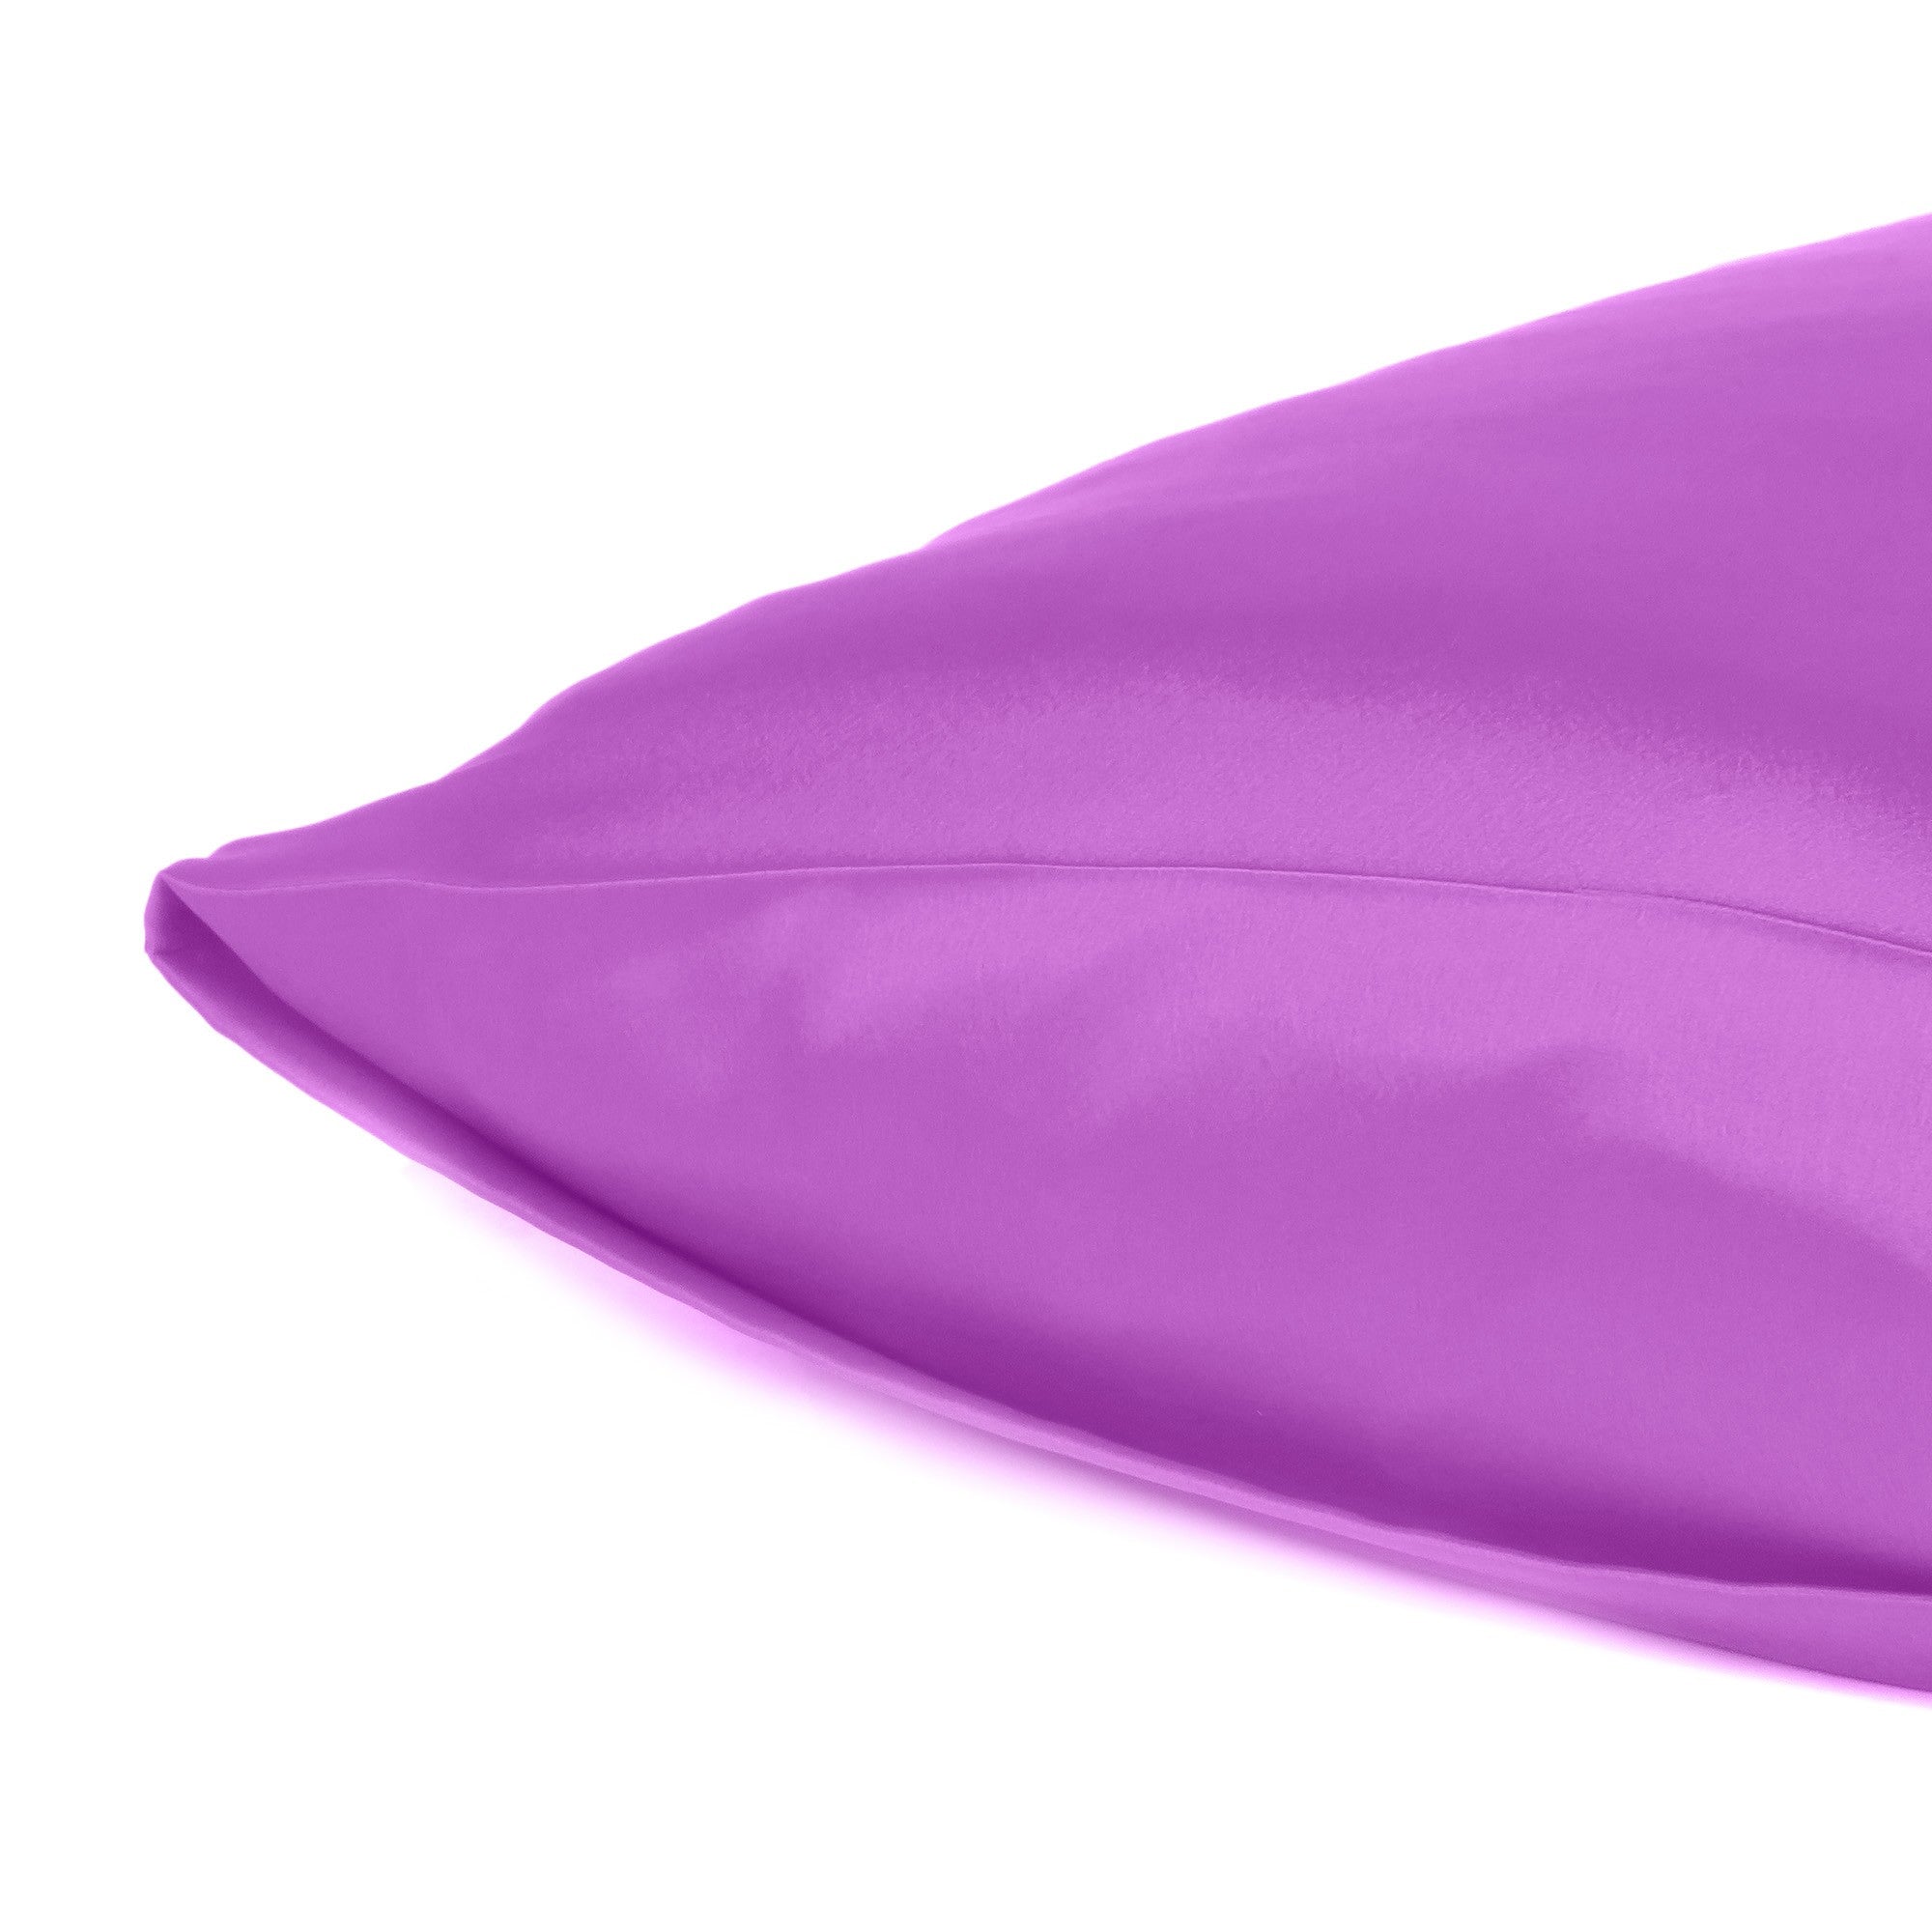 Purple Merlot Dreamy Set Of 2 Silky Satin Standard Pillowcases - Tuesday Morning-Bed Sheets